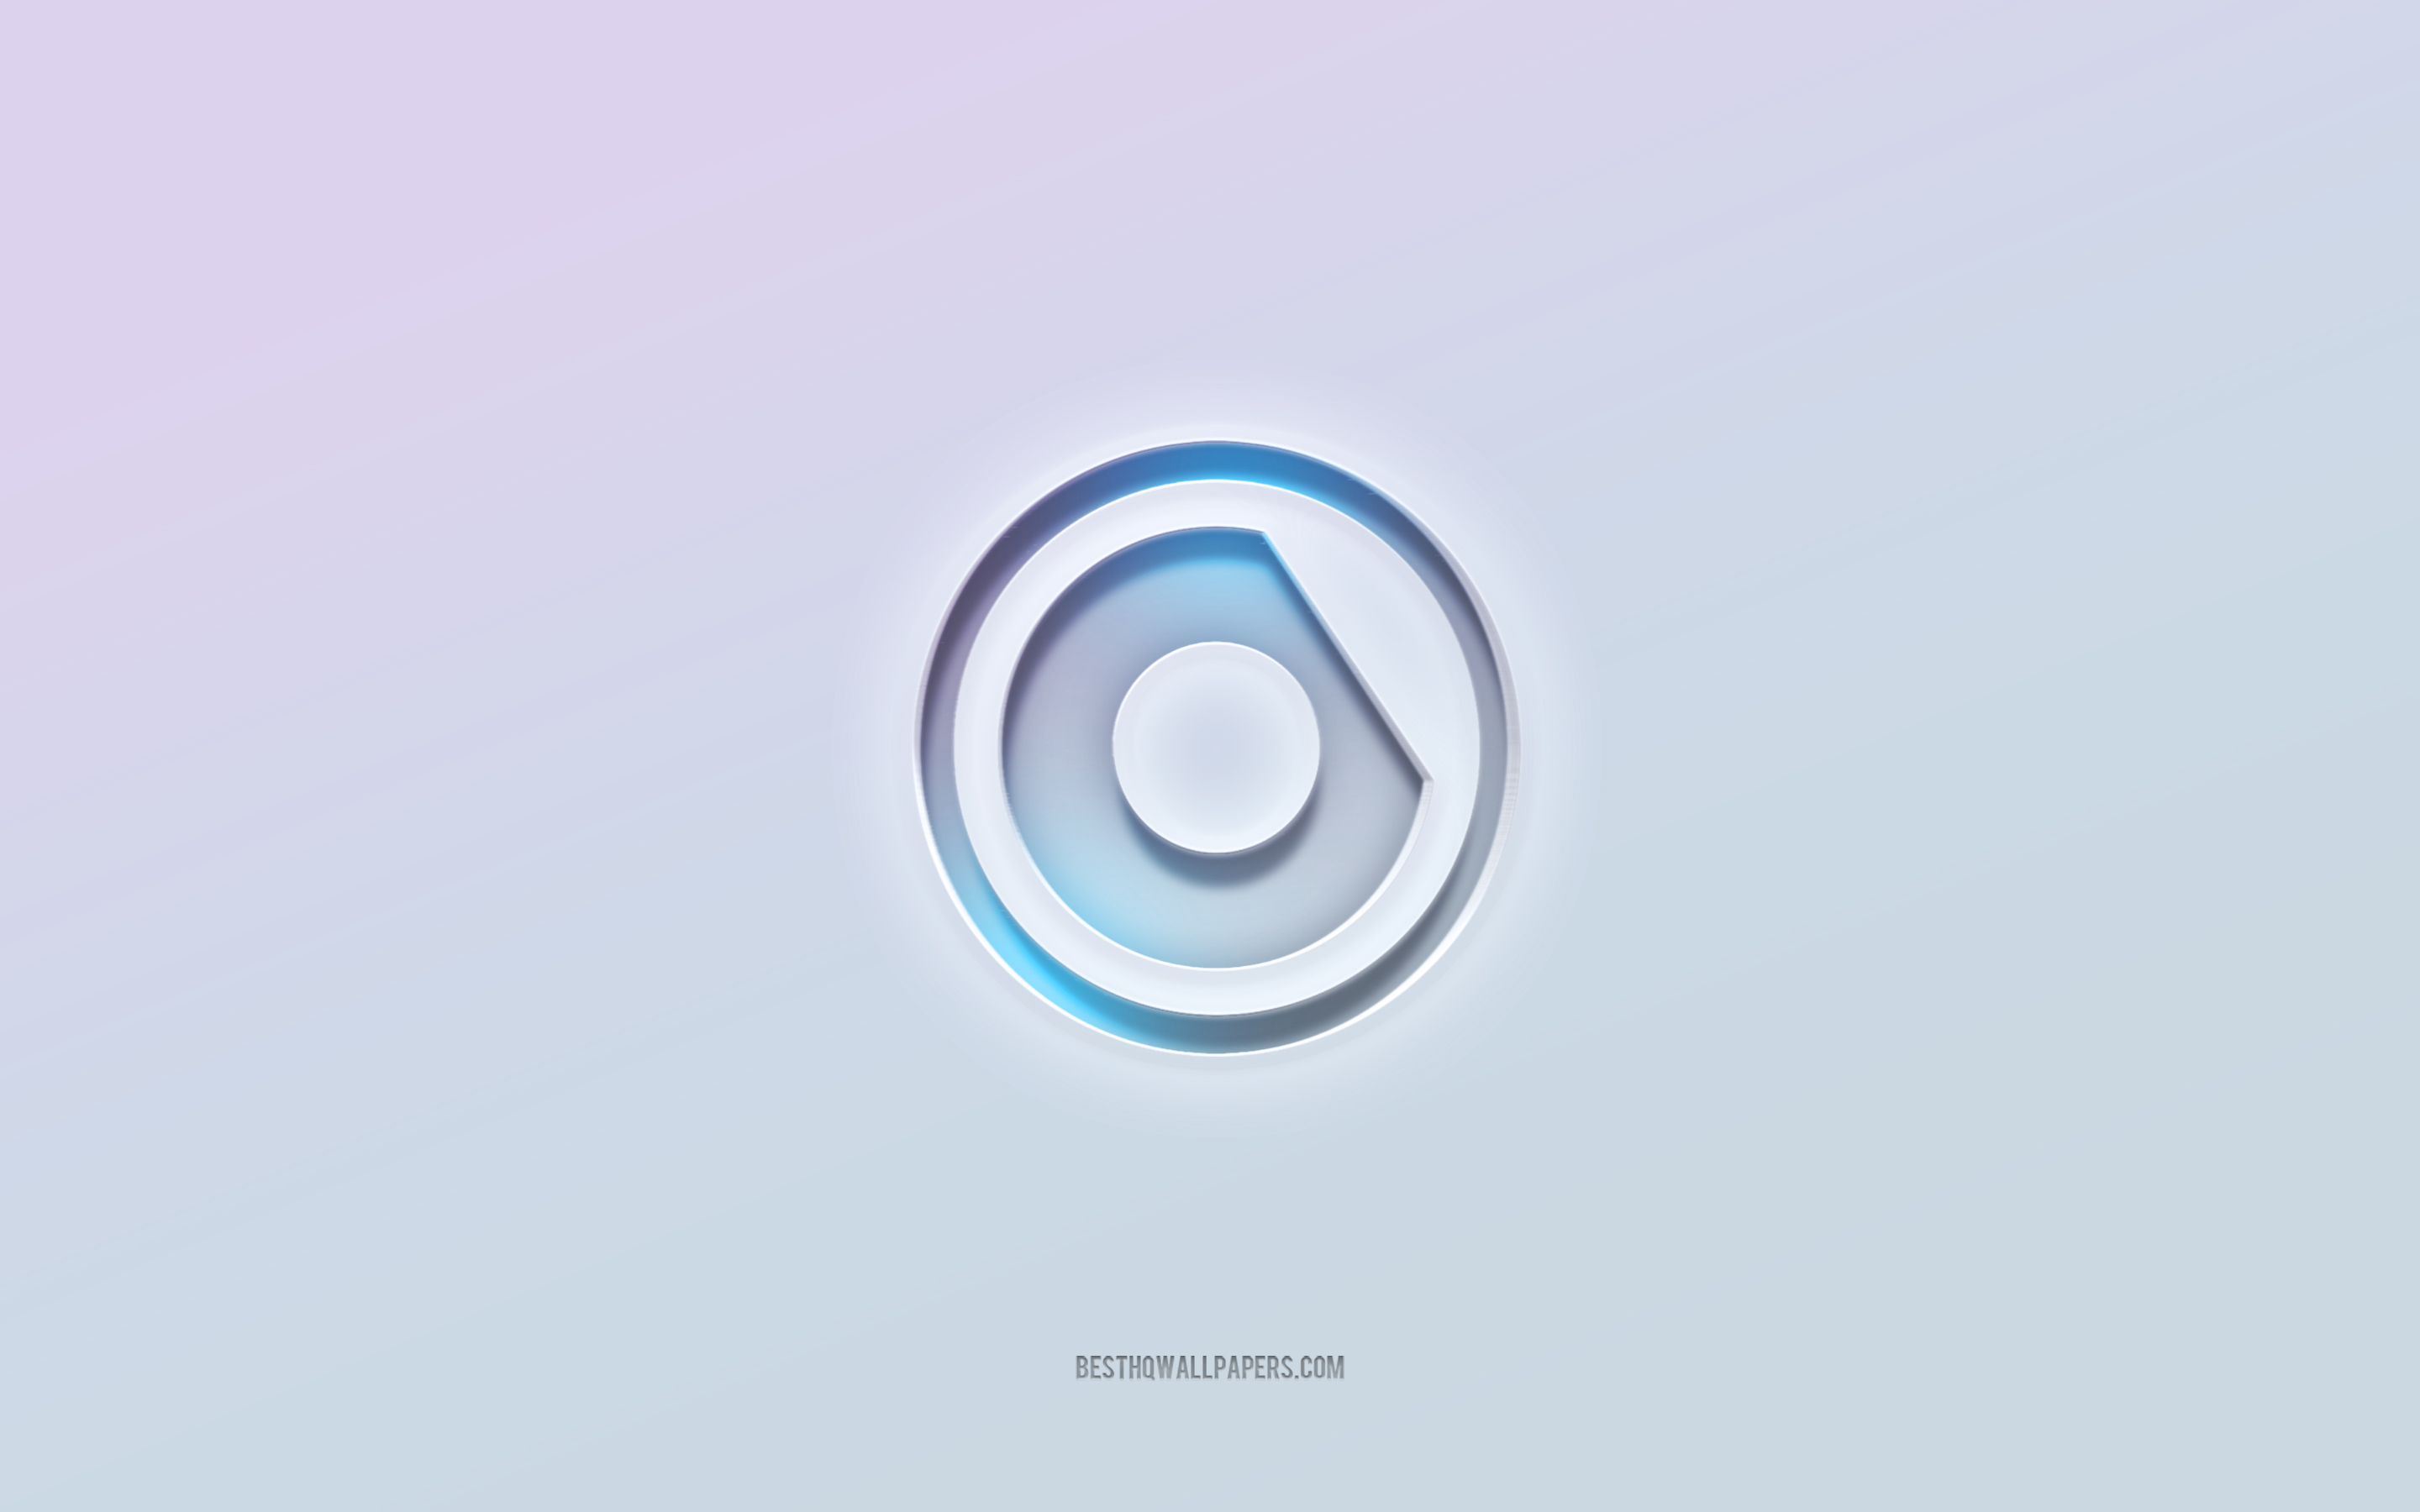 Nicky Romero logo, cut out 3d text, white background, Nicky Romero 3d logo, Nicky Romero emblem, Nicky Romero, embossed logo, Nicky Romero 3d emblem